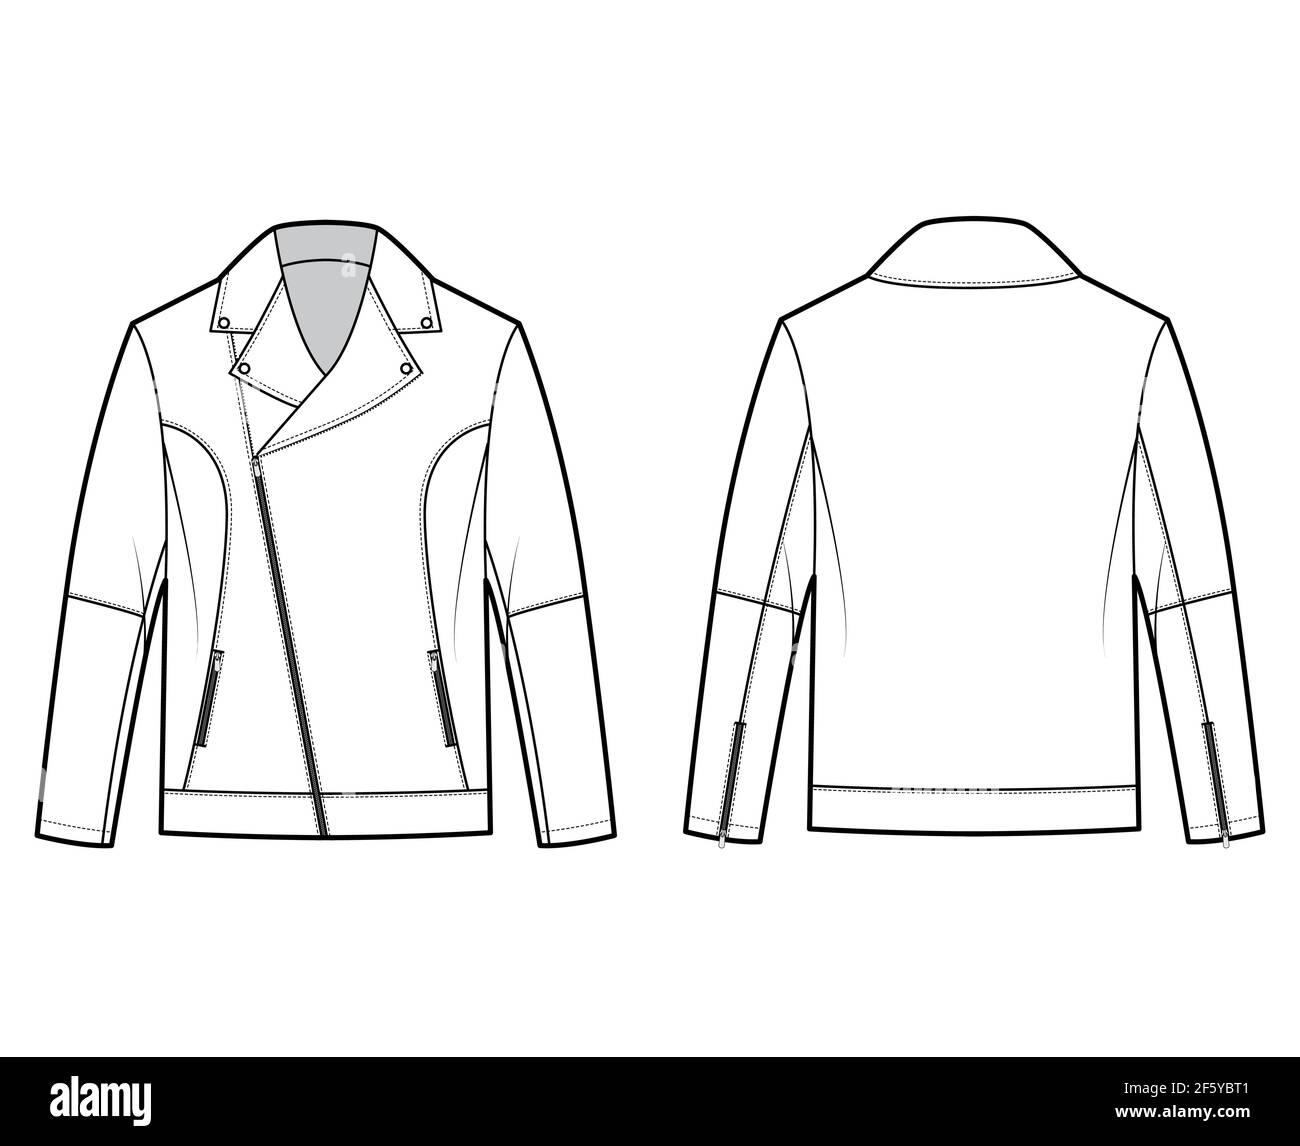 Zip-up biker jacket technical fashion illustration with oversized, zip front fold-over lapels collar, long sleeves, moto details. Flat coat template back white color style. Women unisex top CAD mockup Stock Vector